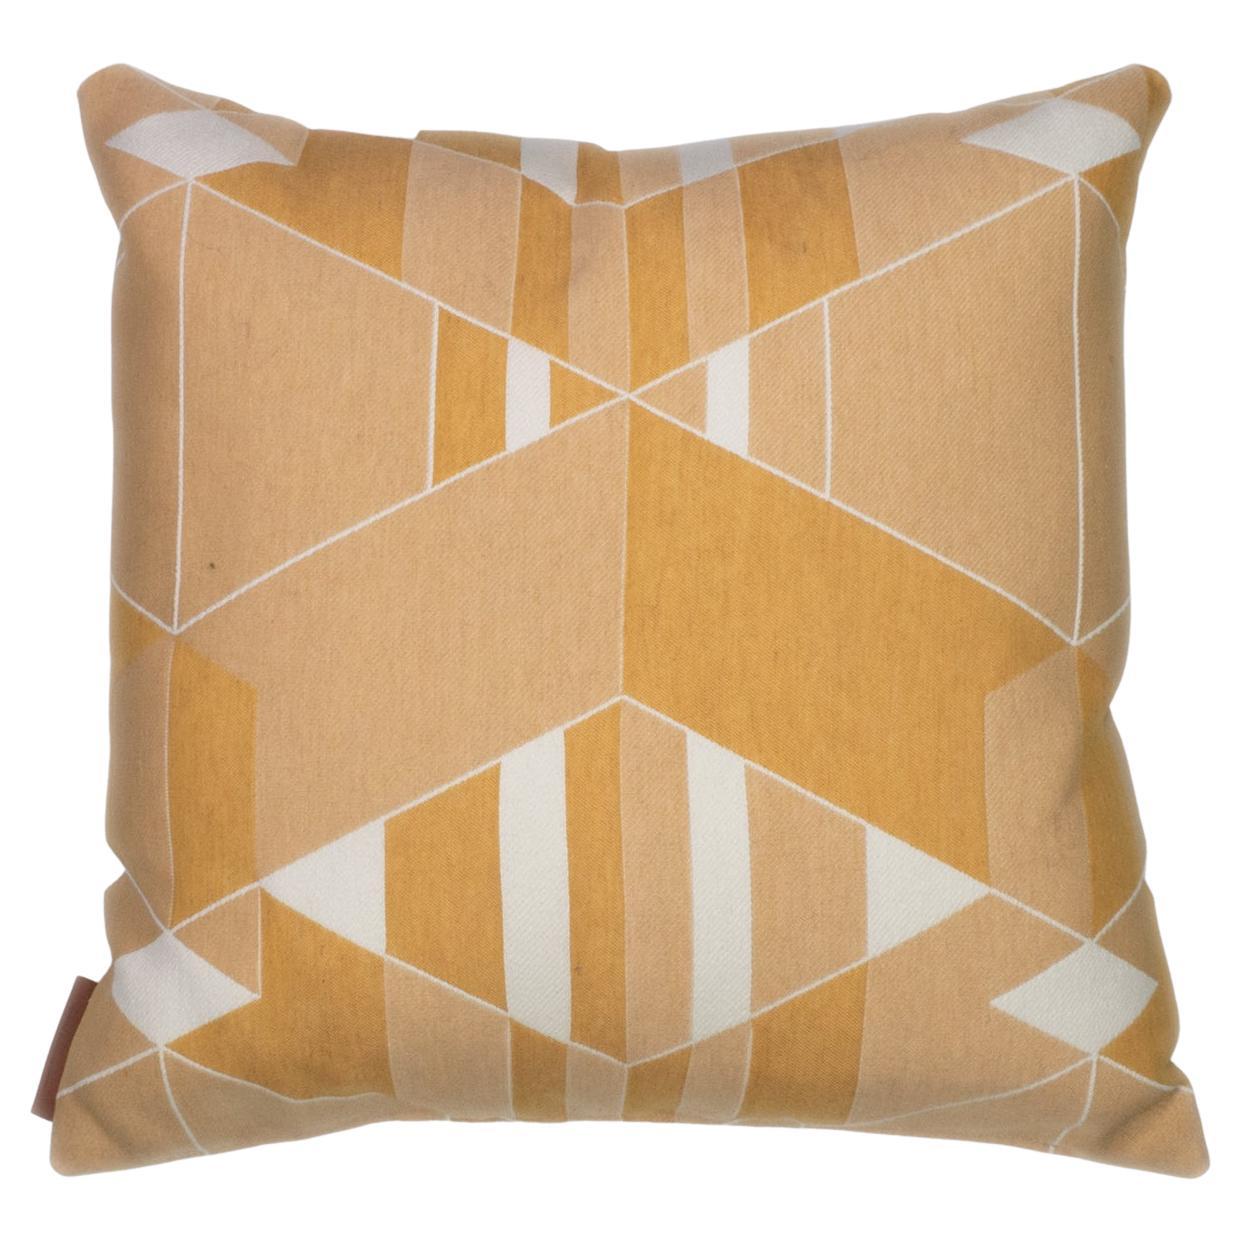 Cushion / Pattern Cushion Absolute Coup De Foudre Gold Reverse by Evolution21